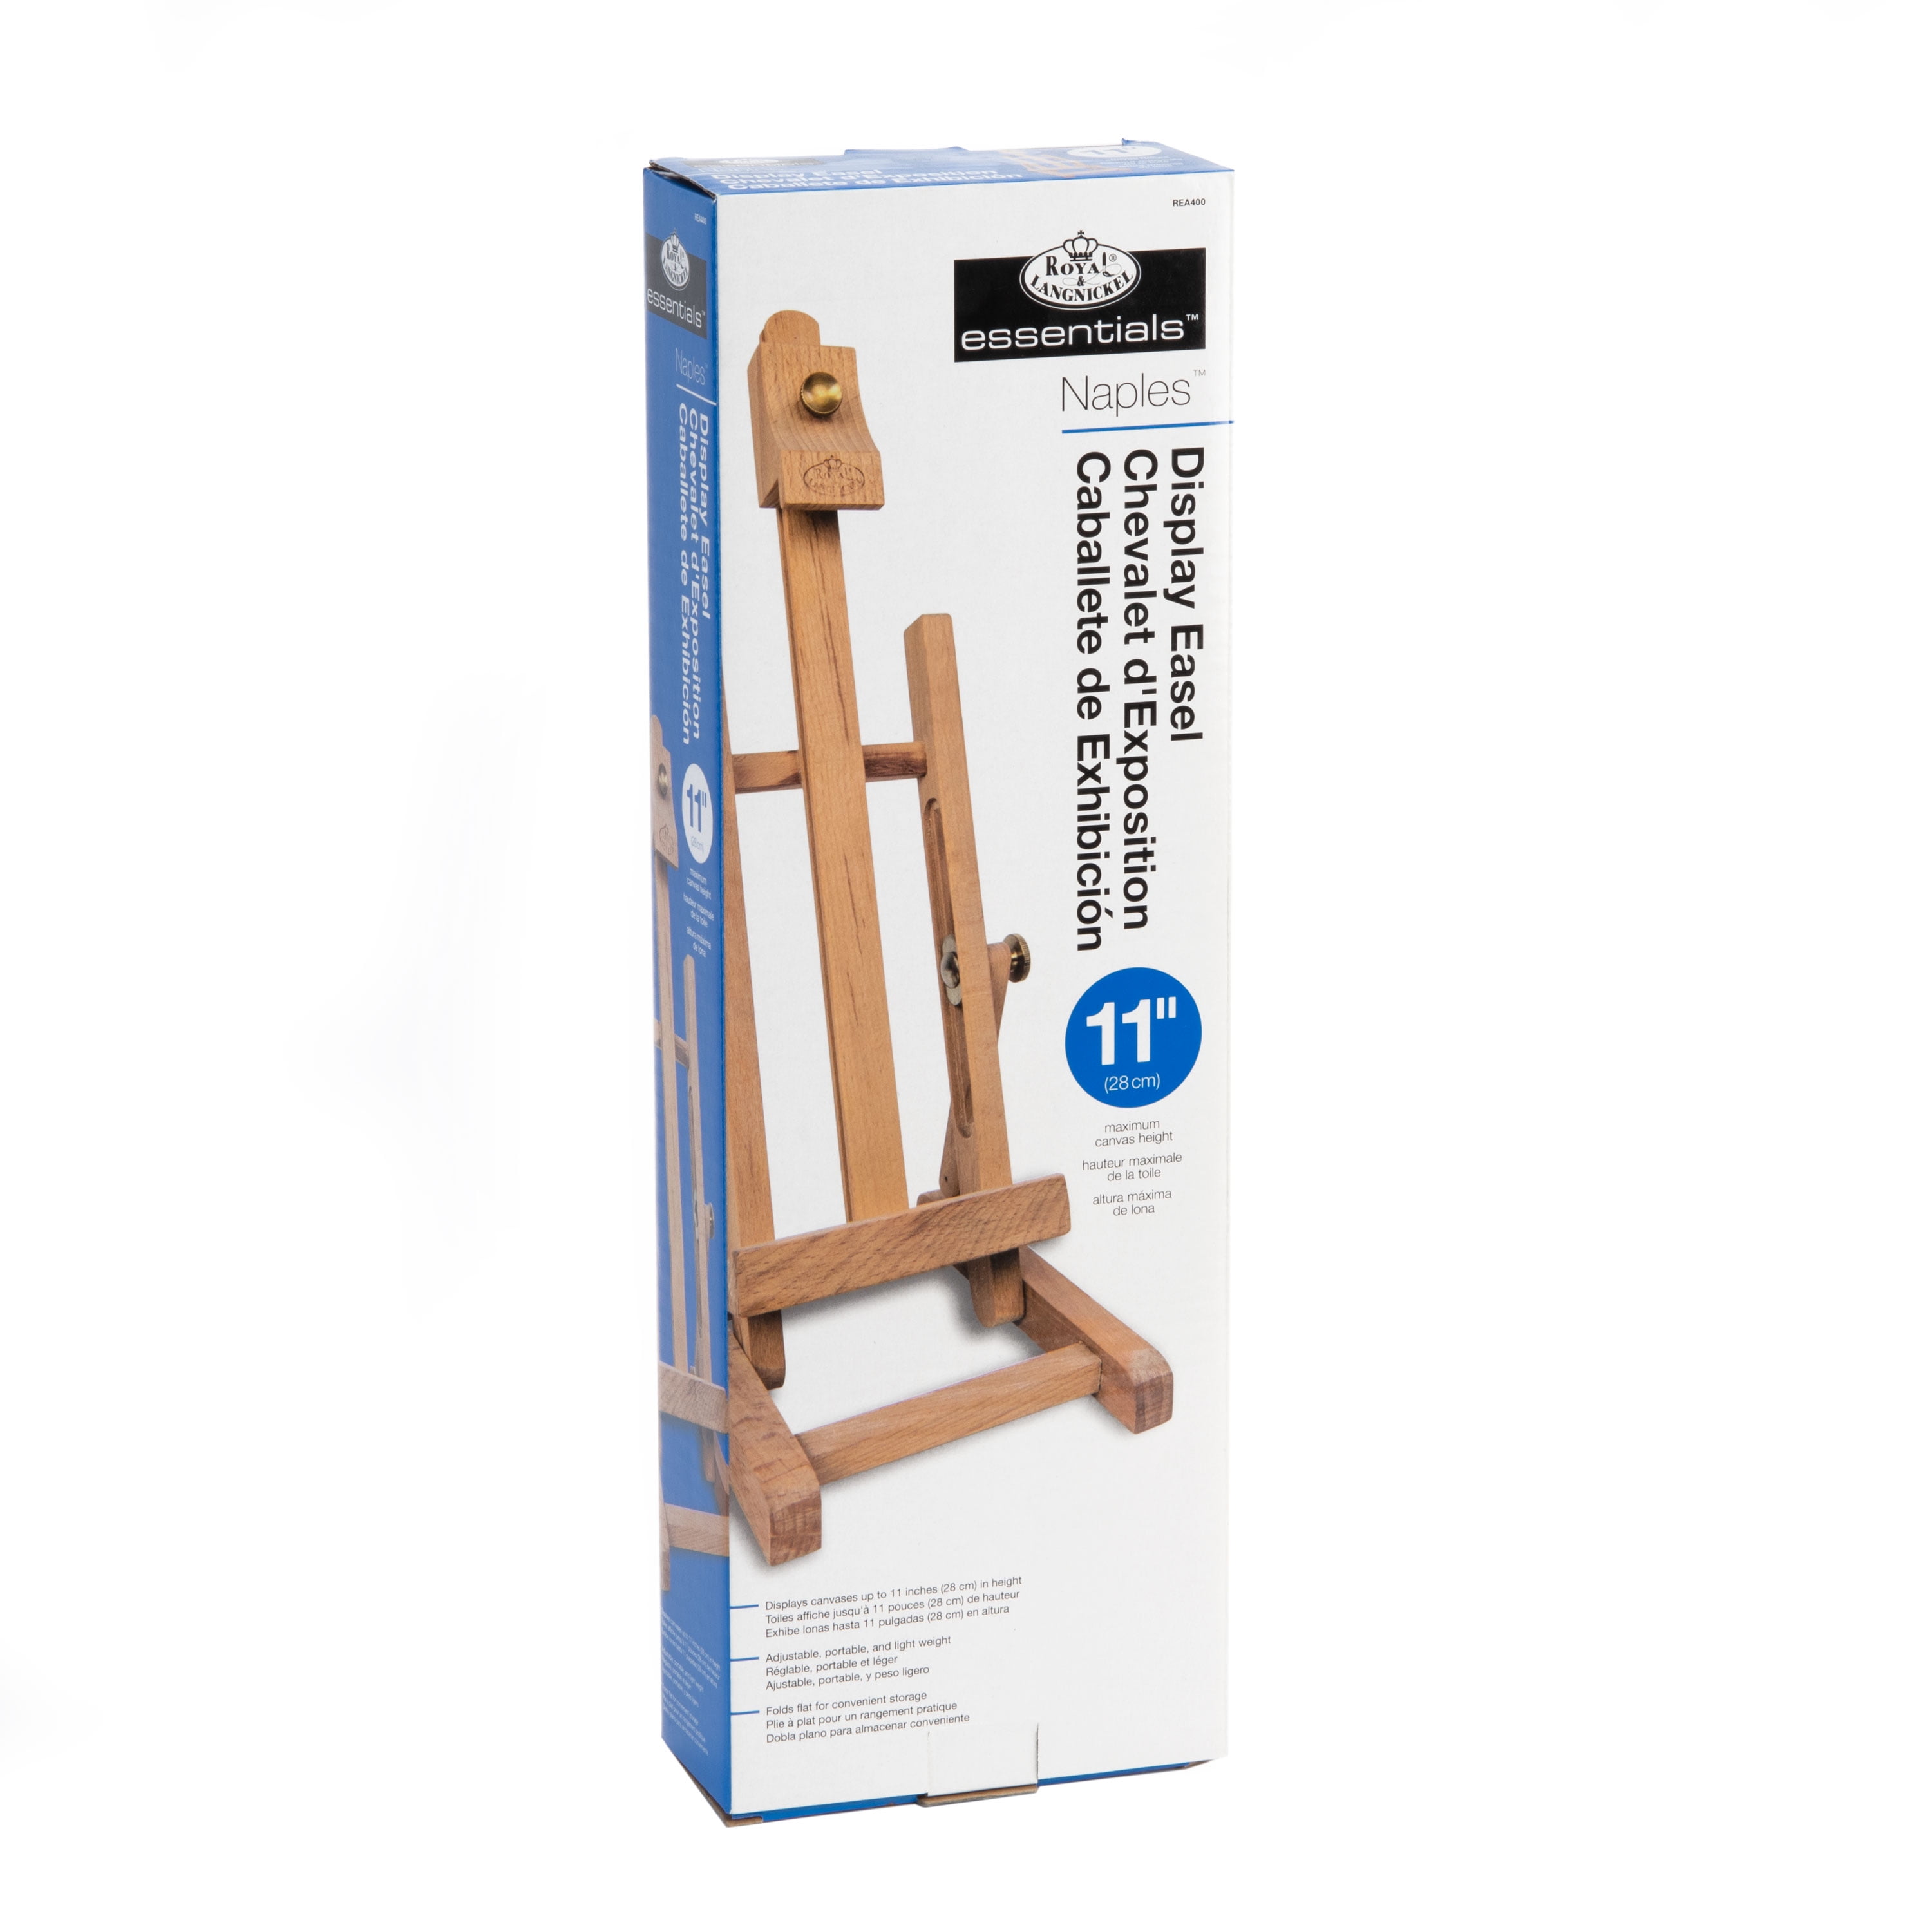 Wooden Tabletop Easel - Numeral Paint Kit